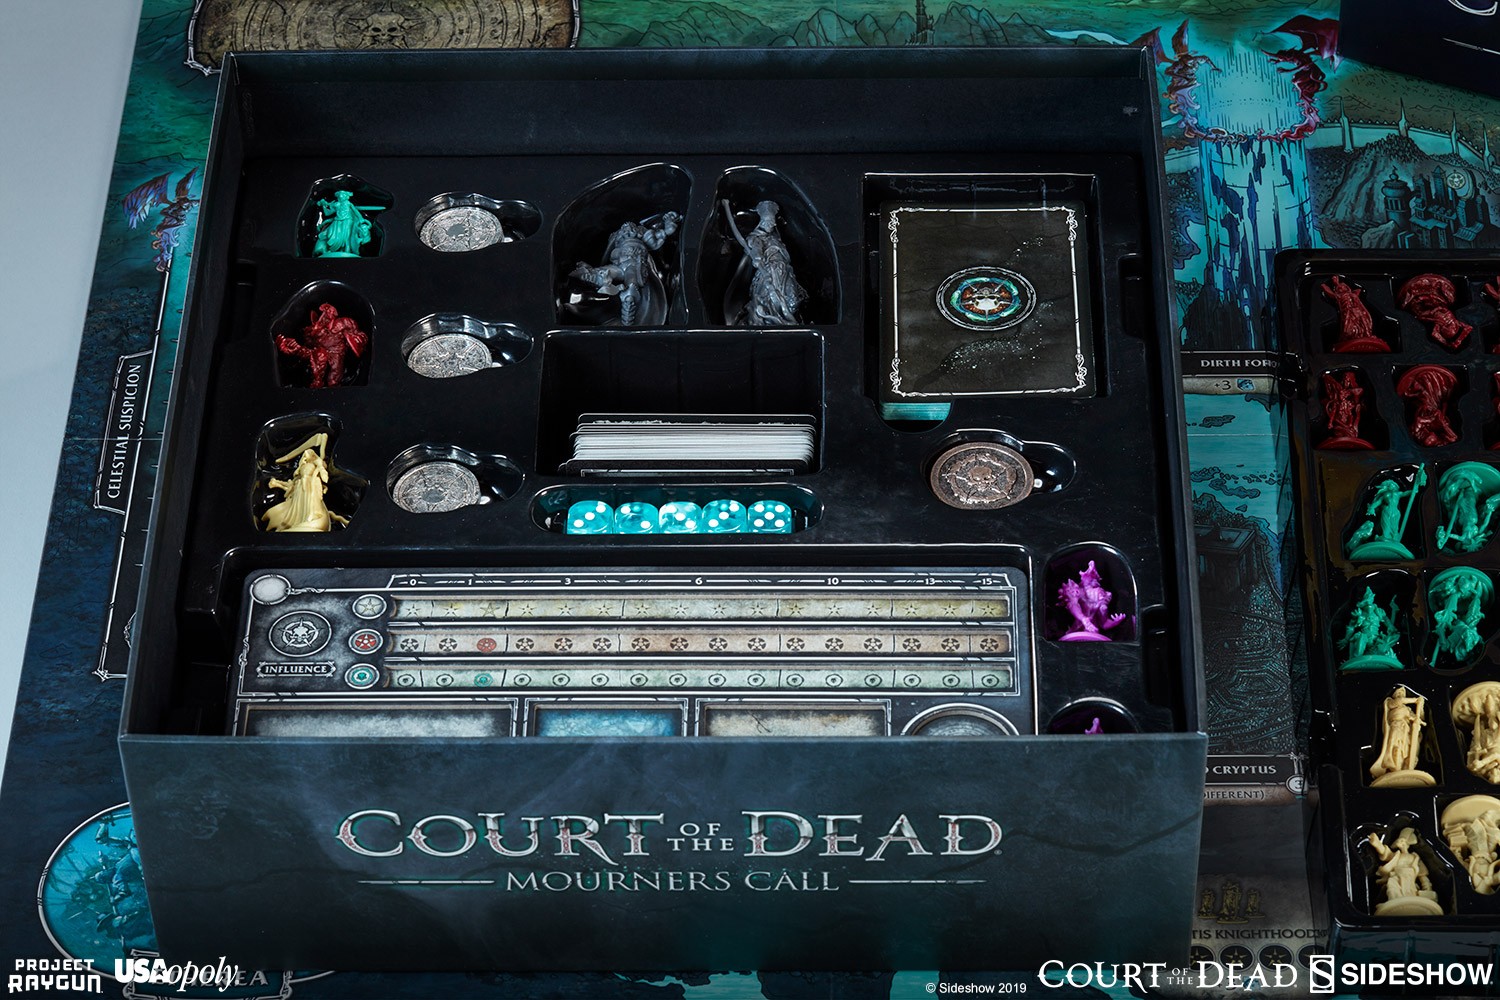 Court of the Dead Mourner's Call Game Exclusive Edition (Prototype Shown) View 9